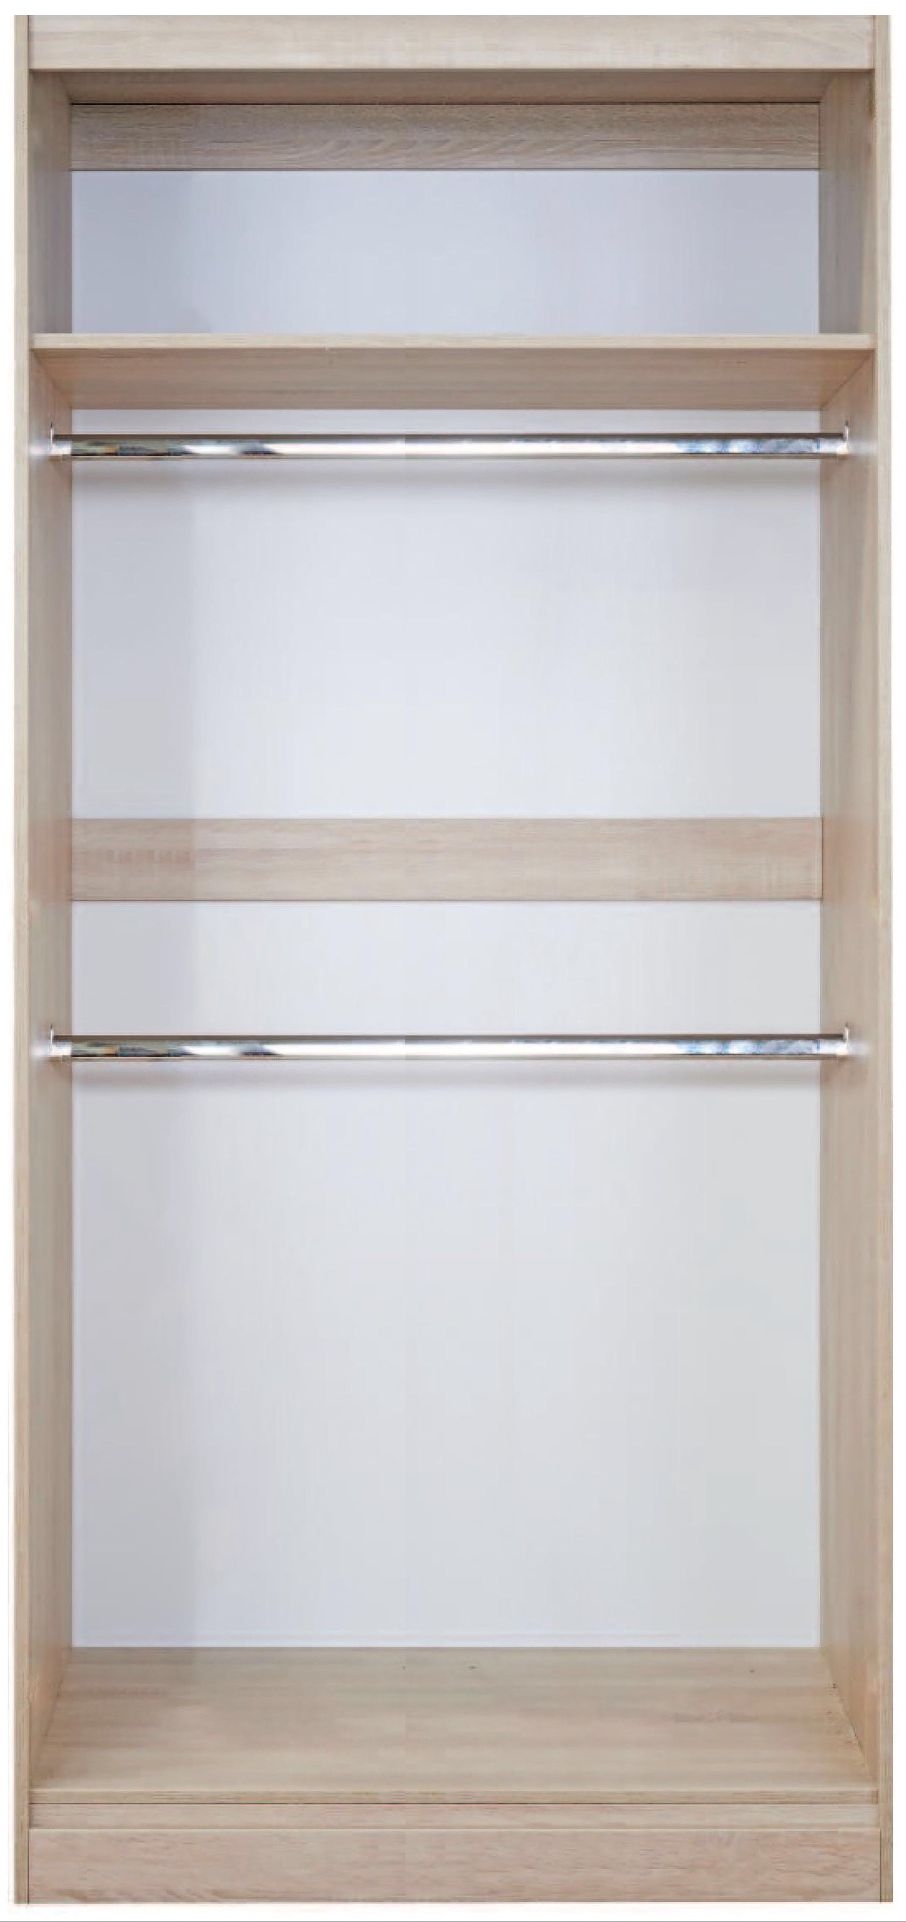 Pembroke 2 Door Sliding Wardrobe - Comes in White, Cream and High Gloss White Options